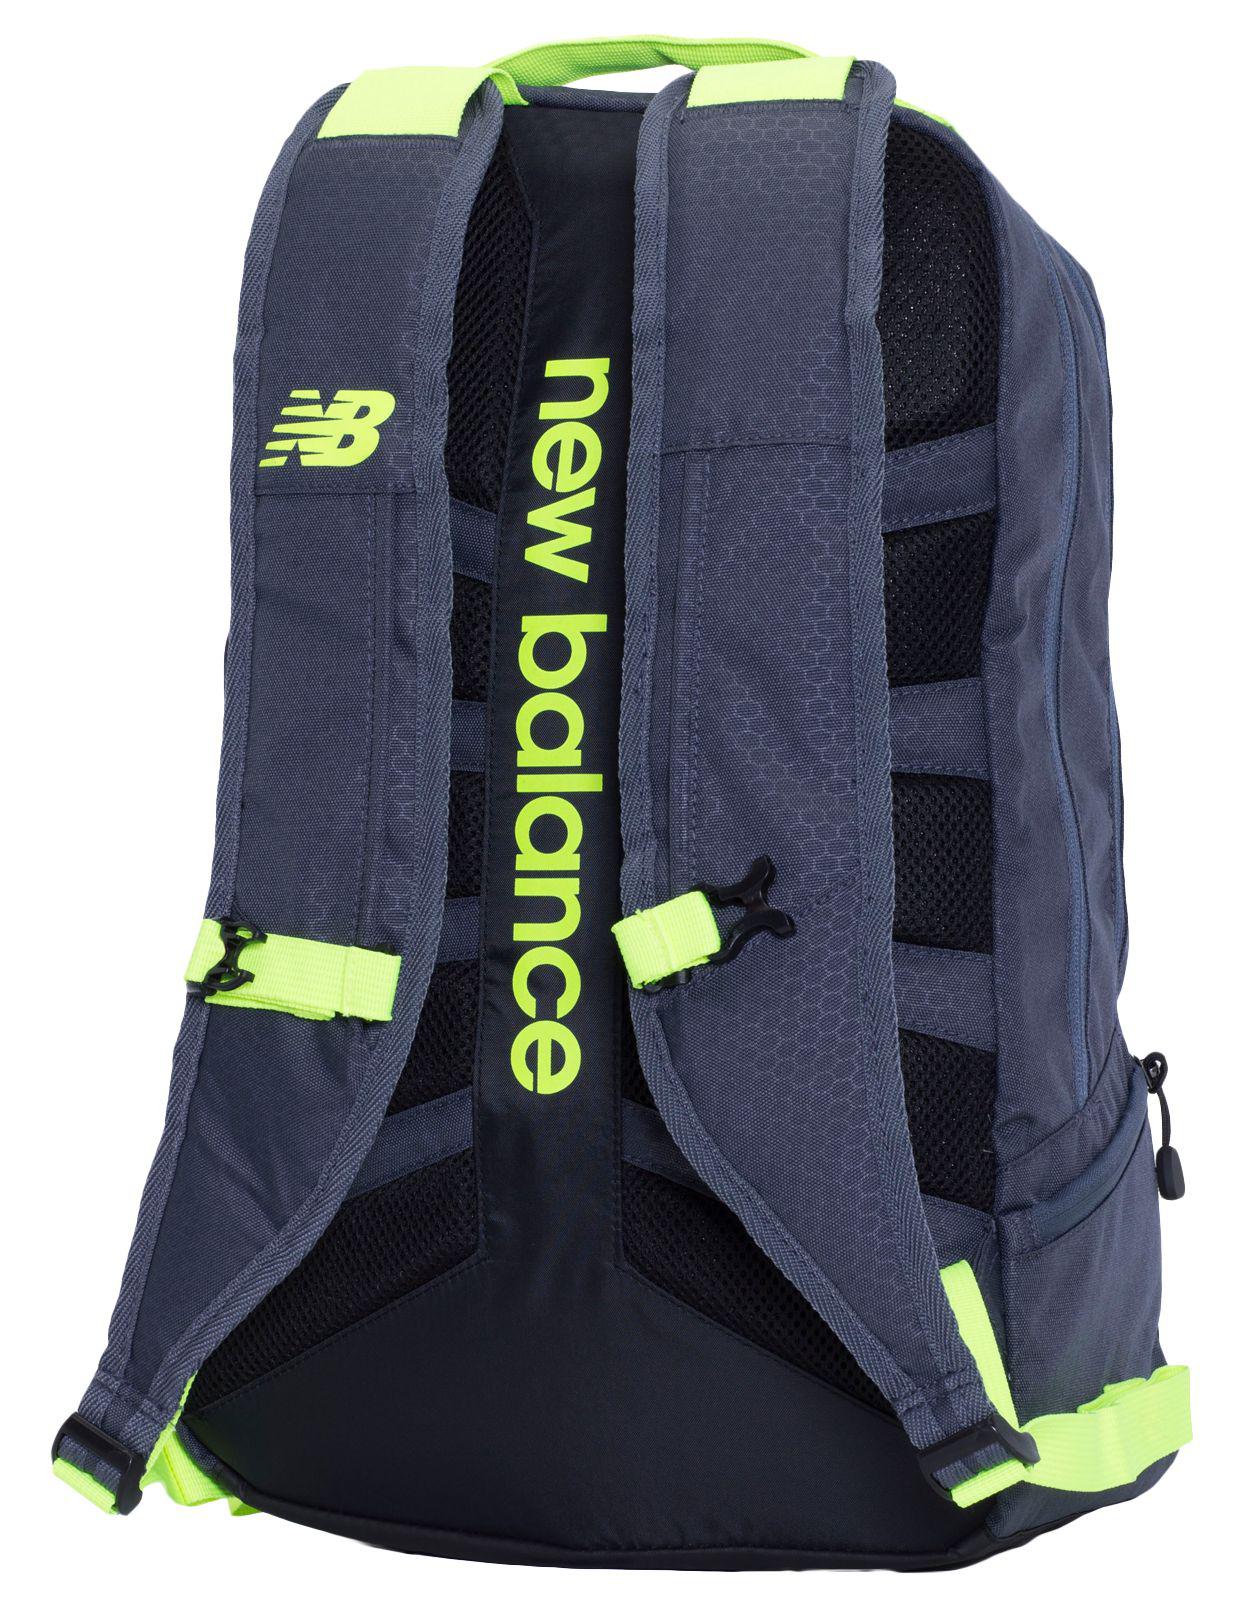 new balance game changer backpack